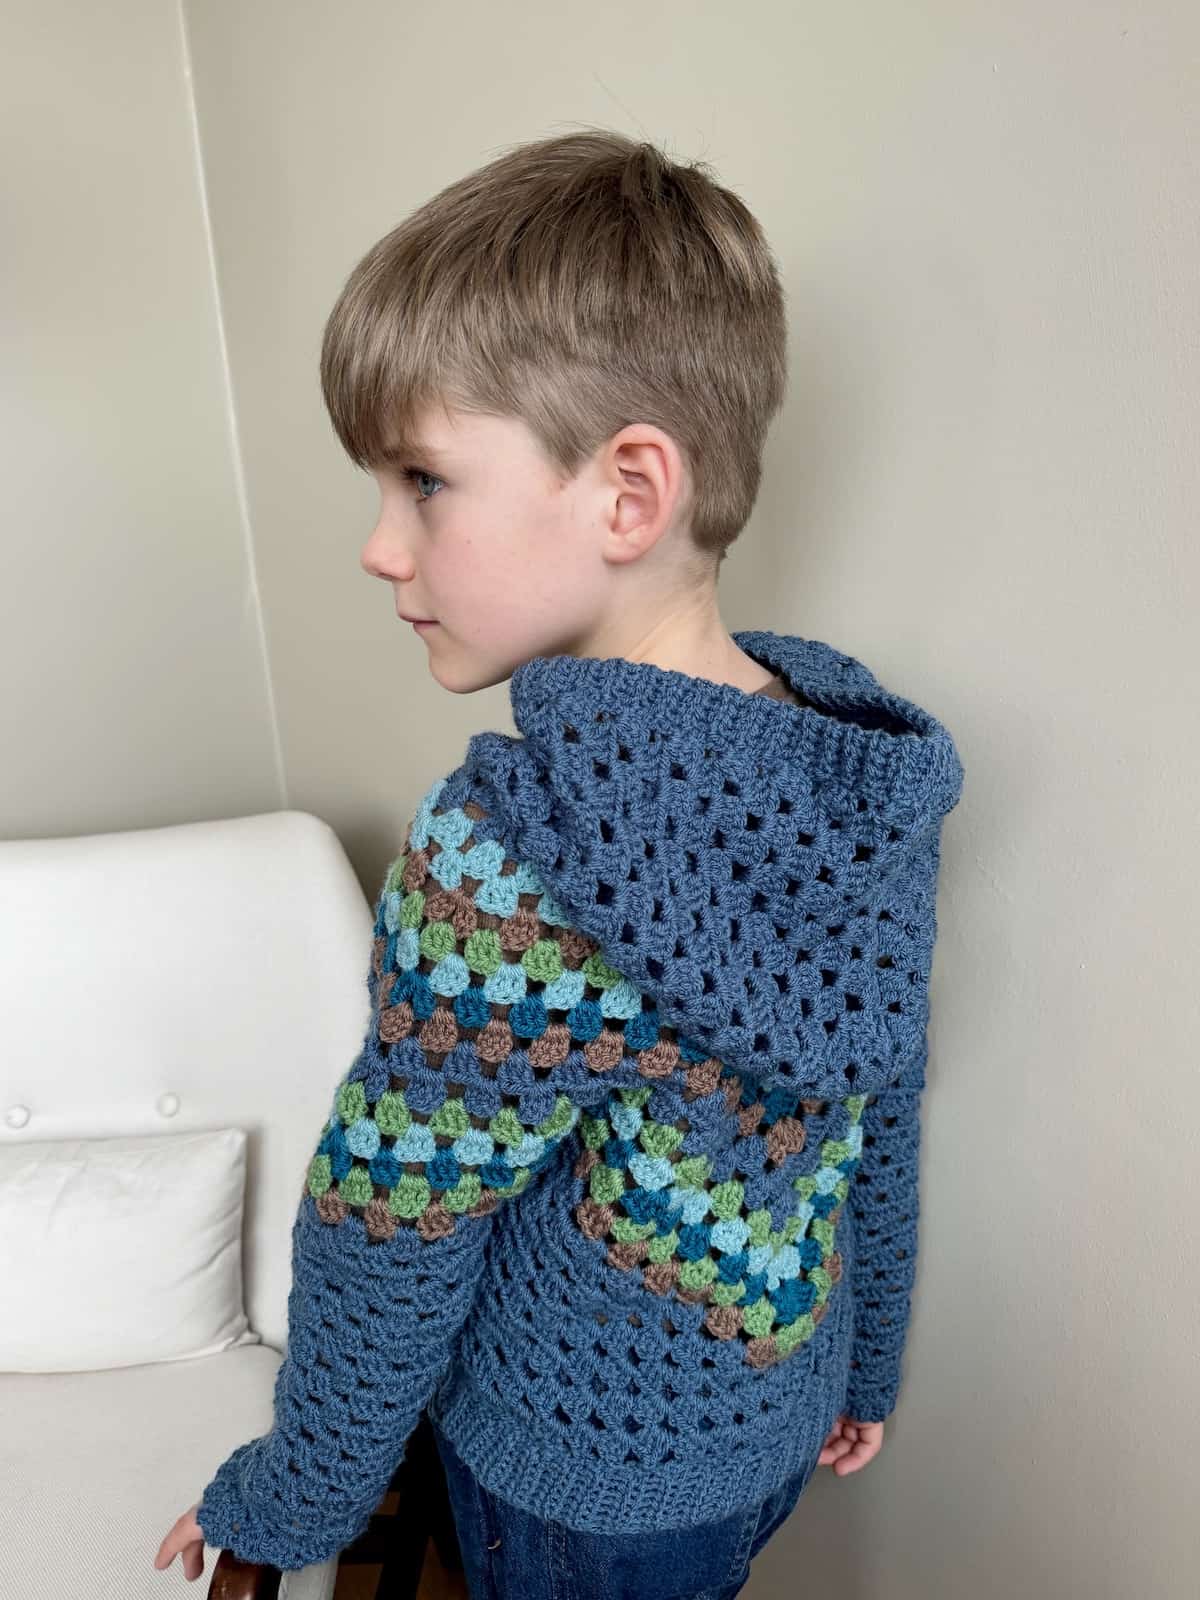 A young boy wearing a blue crocheted hoodie.